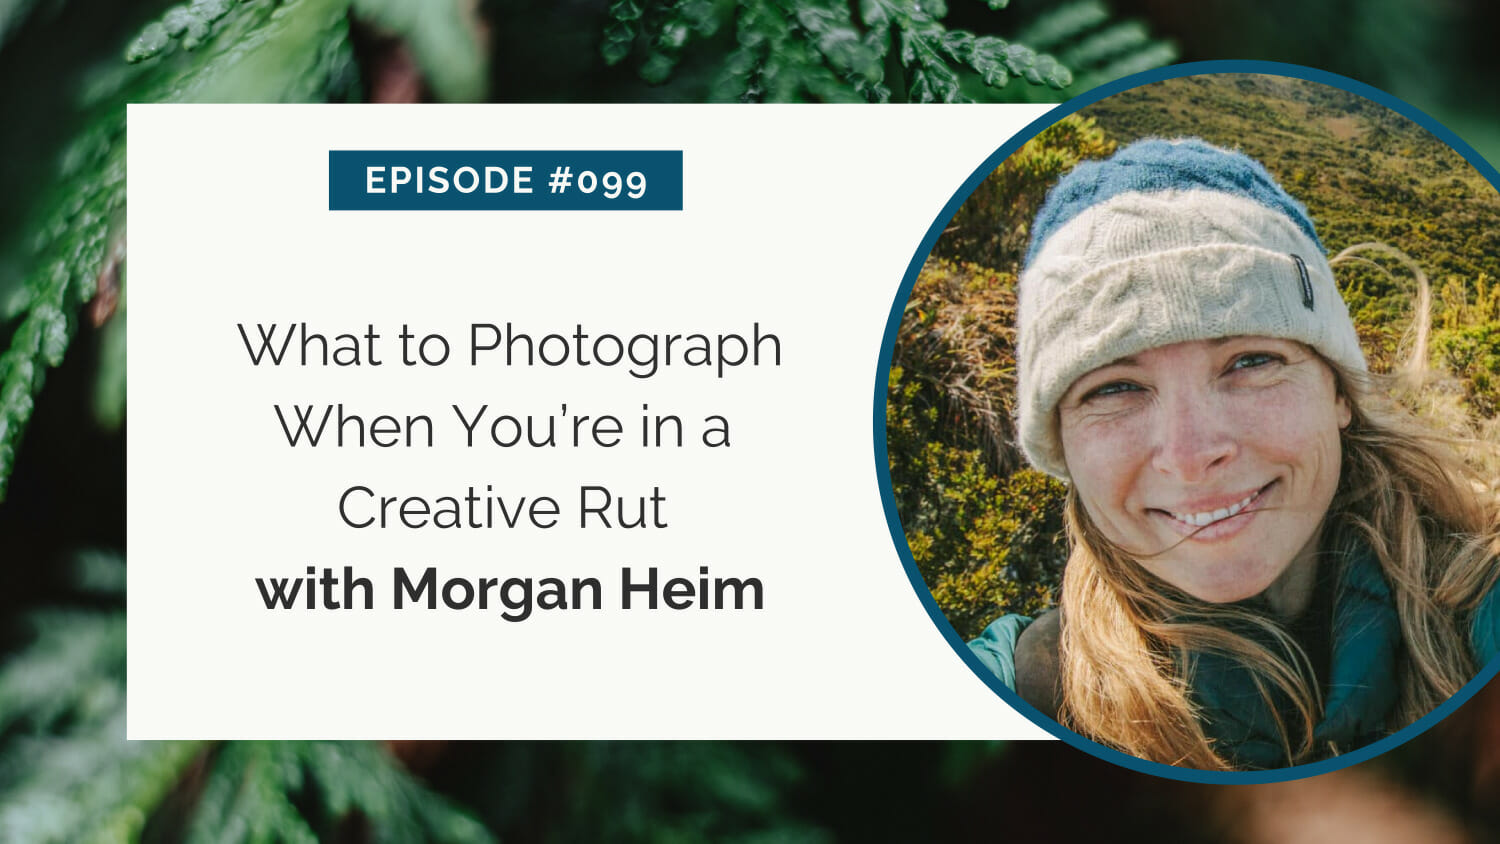 Promotional graphic for episode #099 featuring "what to photograph when you're in a creative rut with morgan heim" against a nature backdrop with a portrait of a smiling woman.